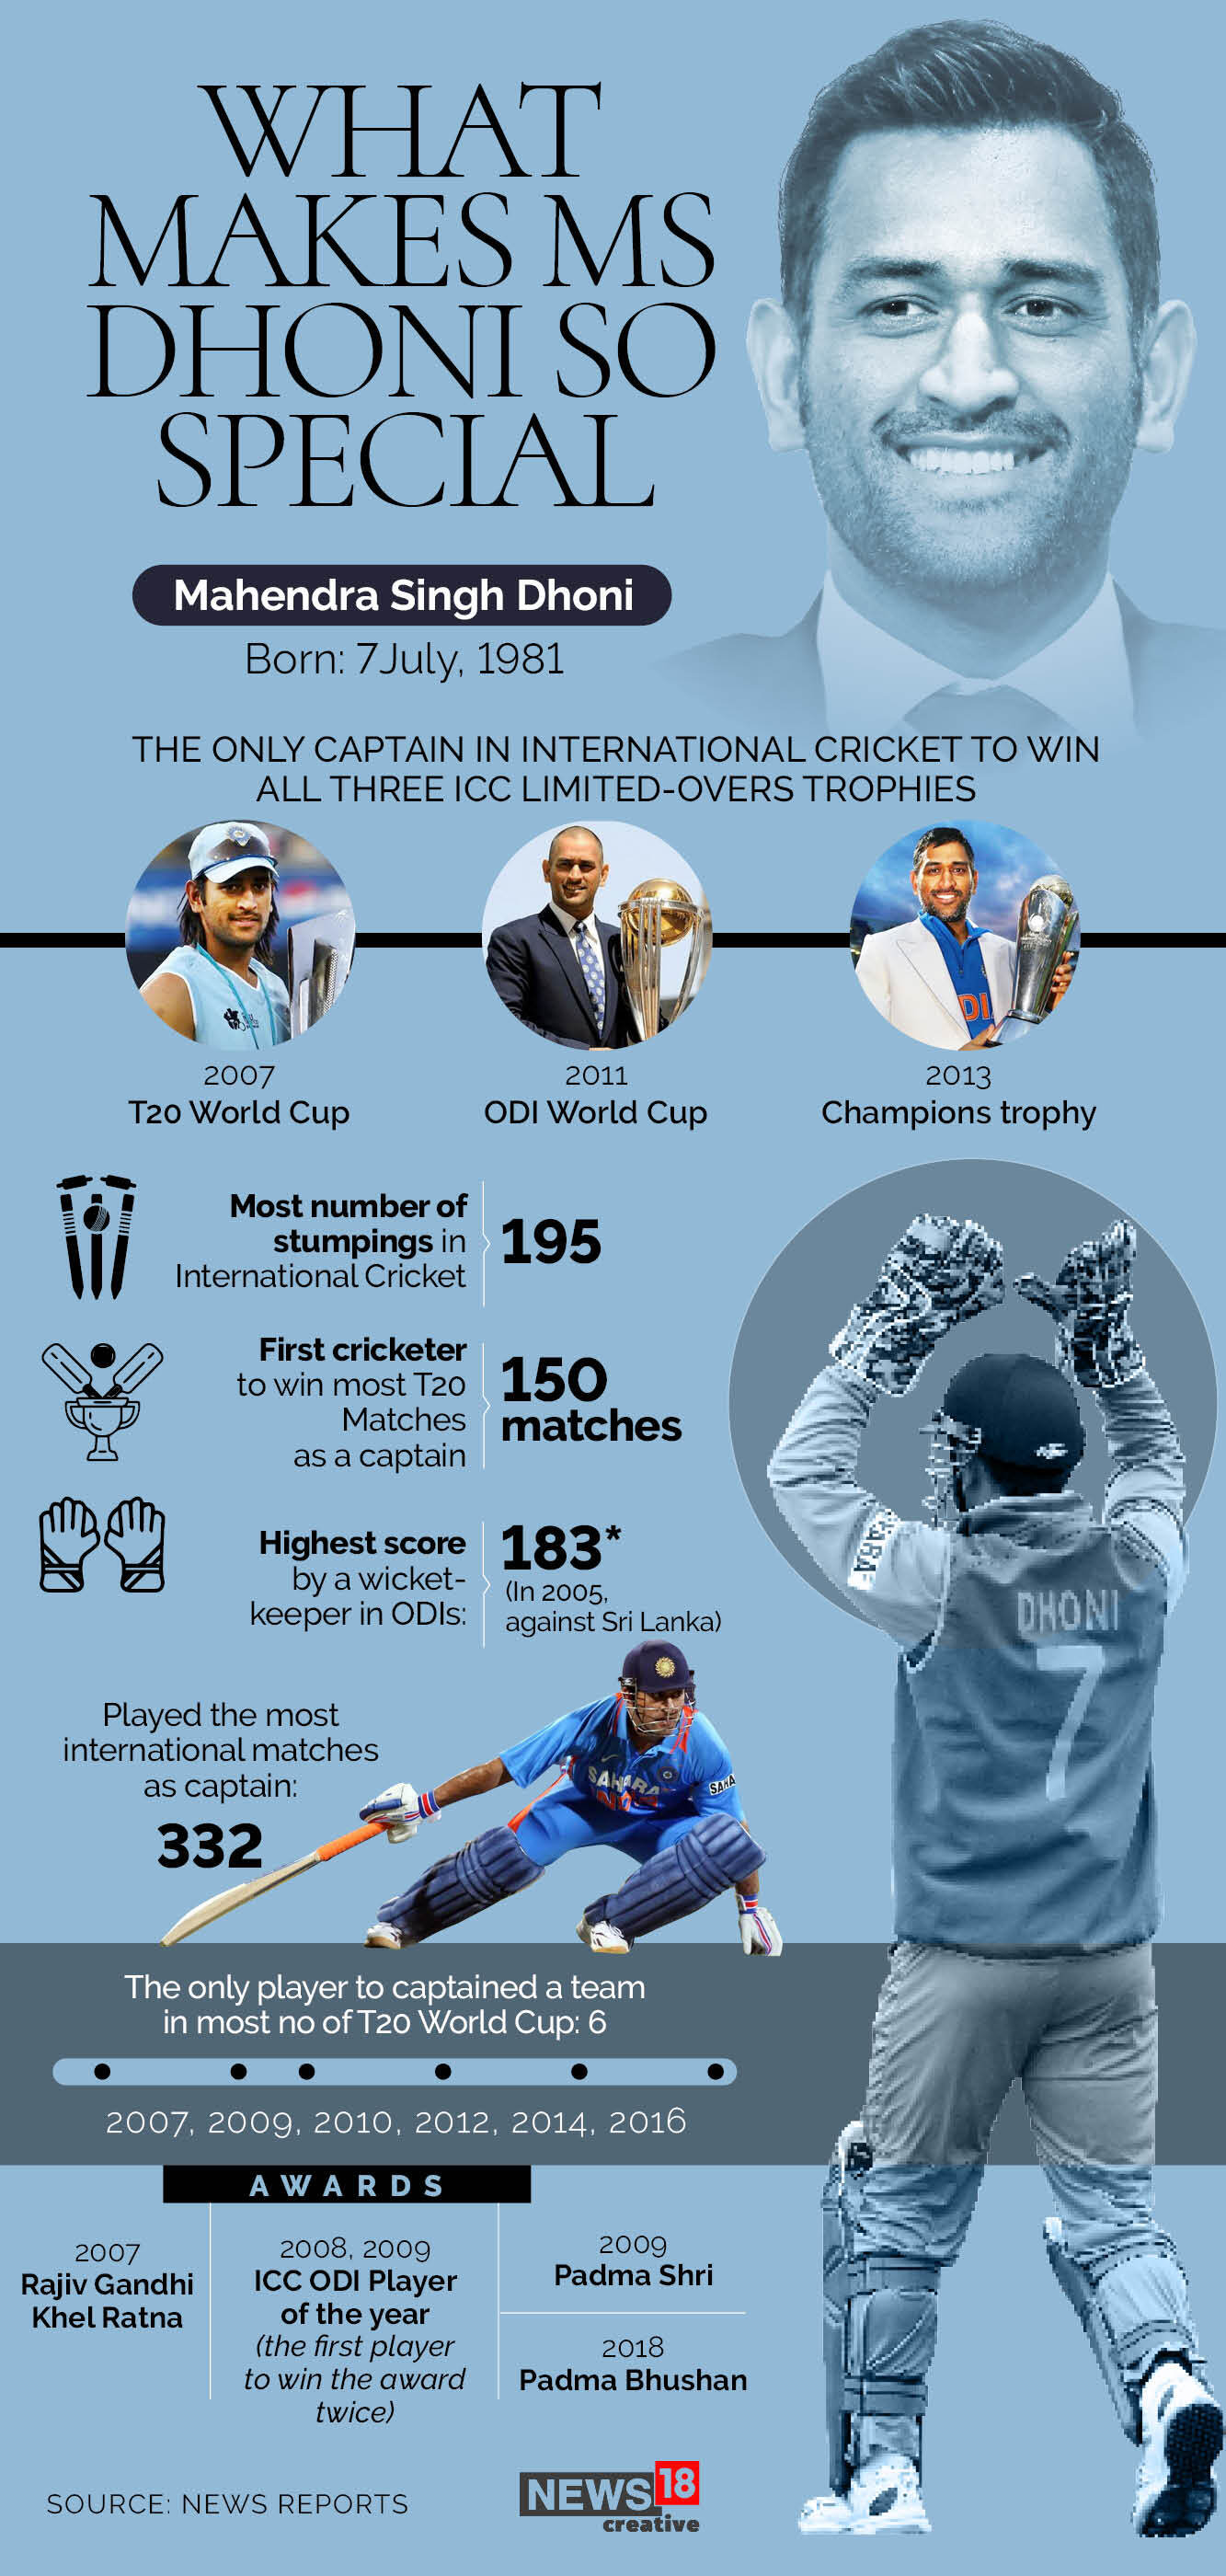 Happy Birthday, MS Dhoni: What makes captain cool special?